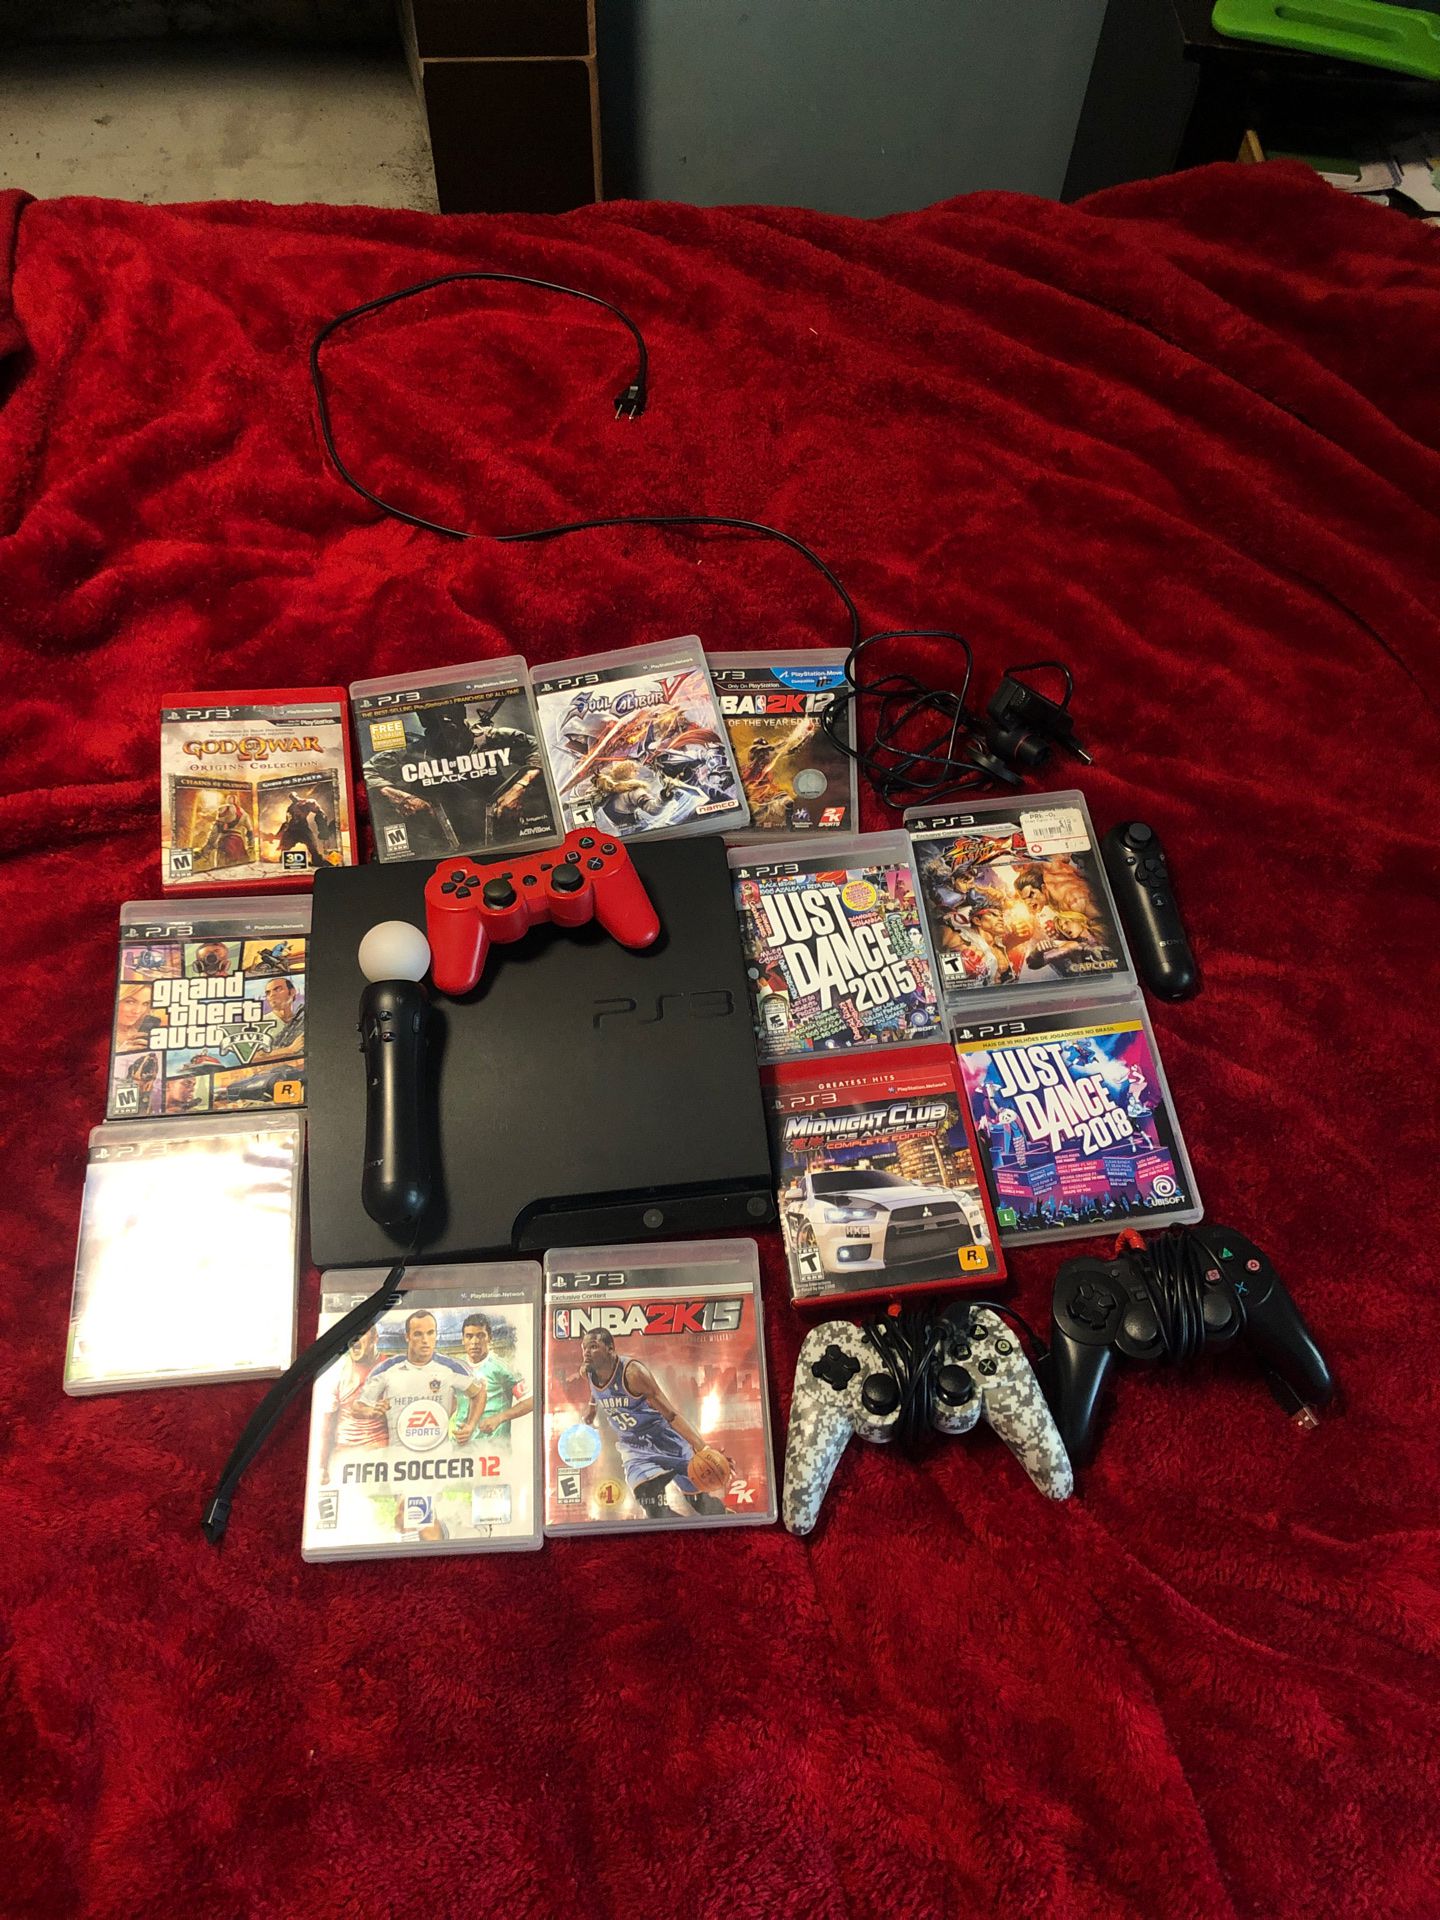 I’m selling my PS3 with games, camera, motion control and 4 controls